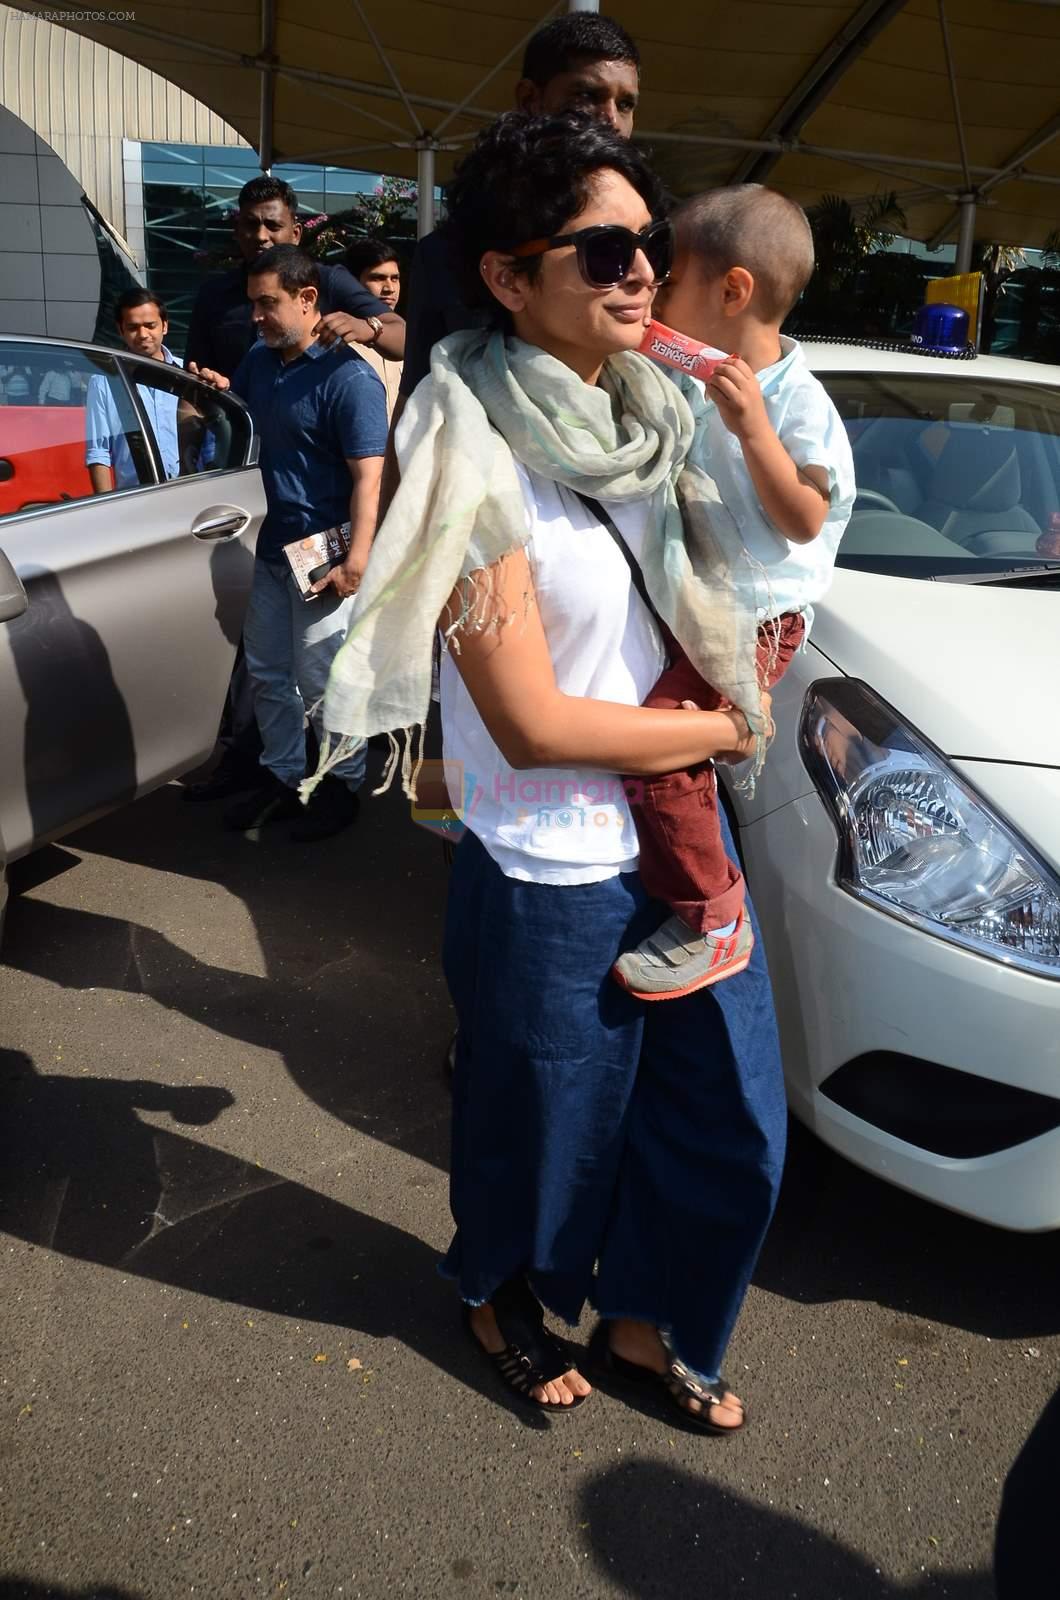 Aamir Kapoor snapped with Kiran Rao and Azad at airport in Mumbai on 8th March 2015